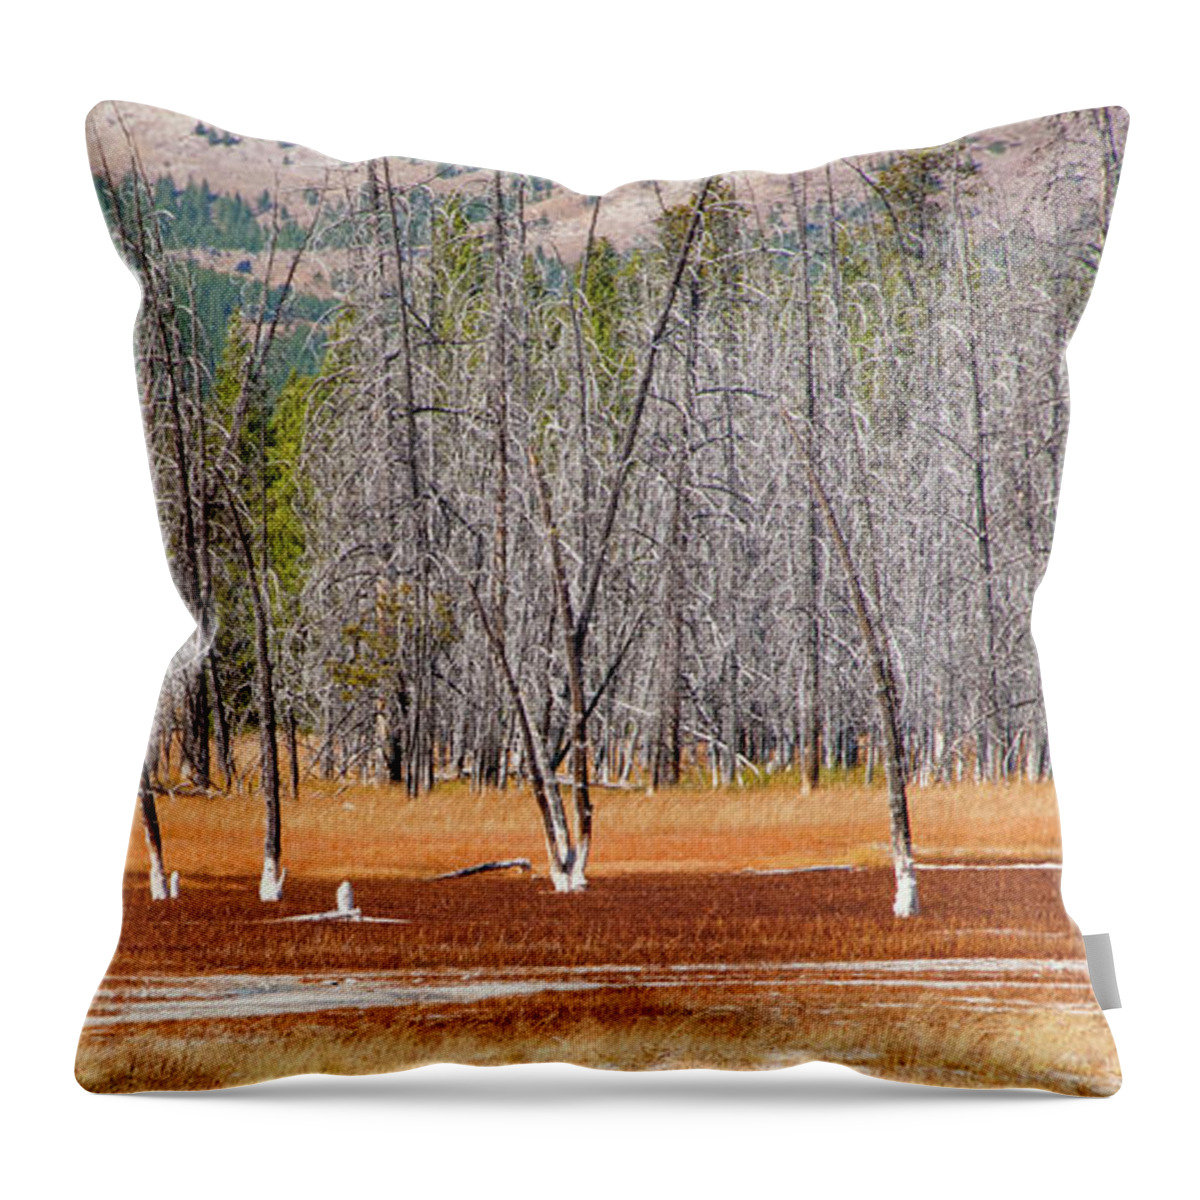 Yellowstone Throw Pillow featuring the photograph Bobby Socks Trees by Steve Stuller